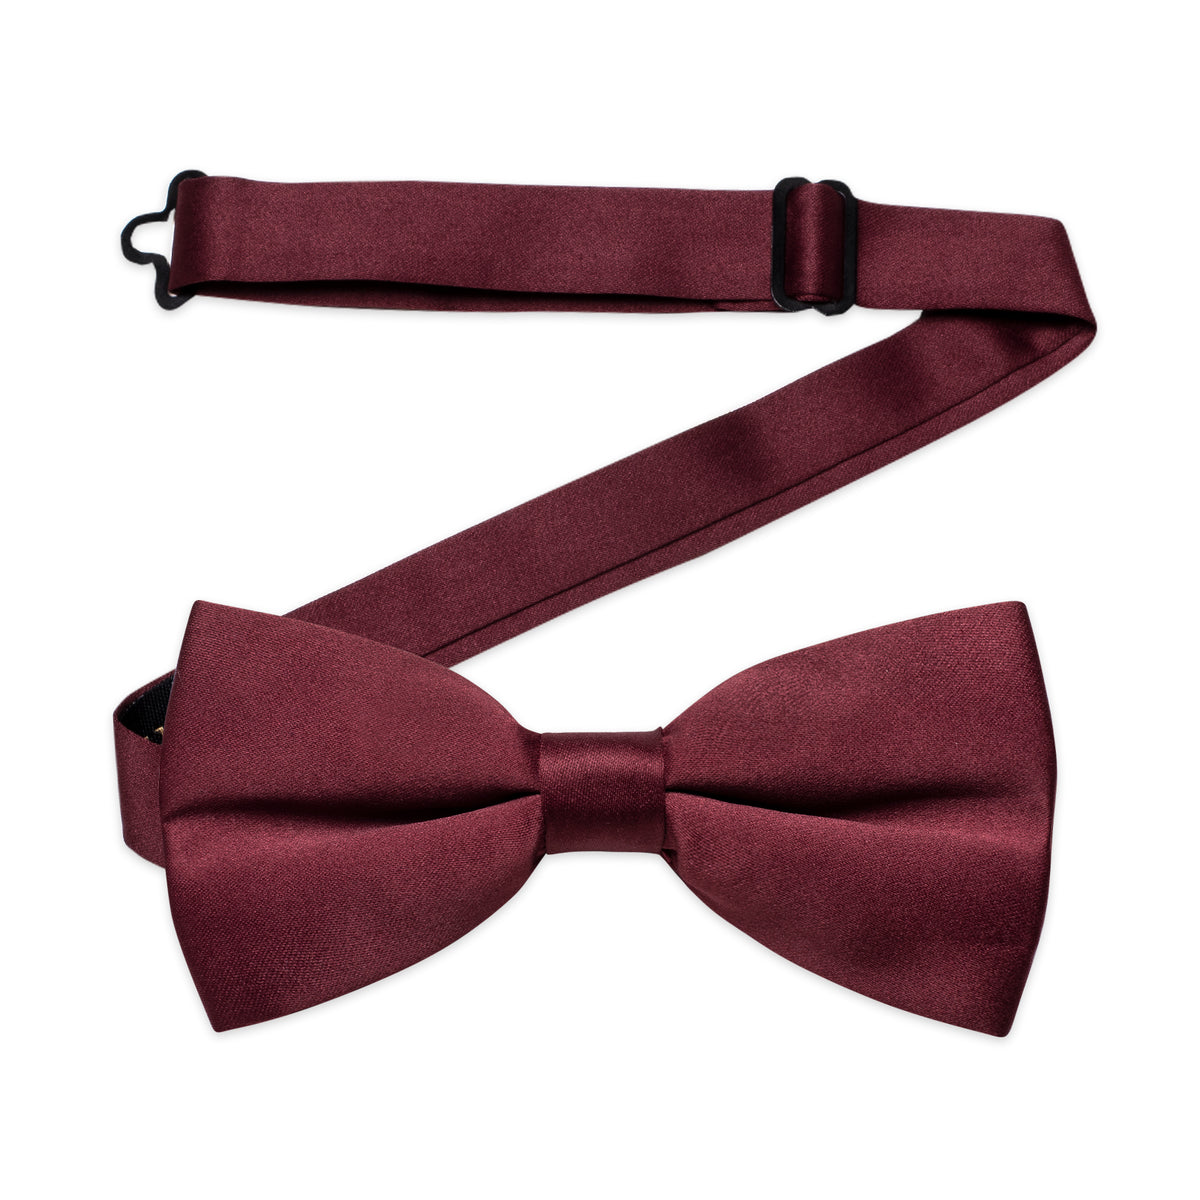 Burgundy Red Solid Pre-tied Bowtie